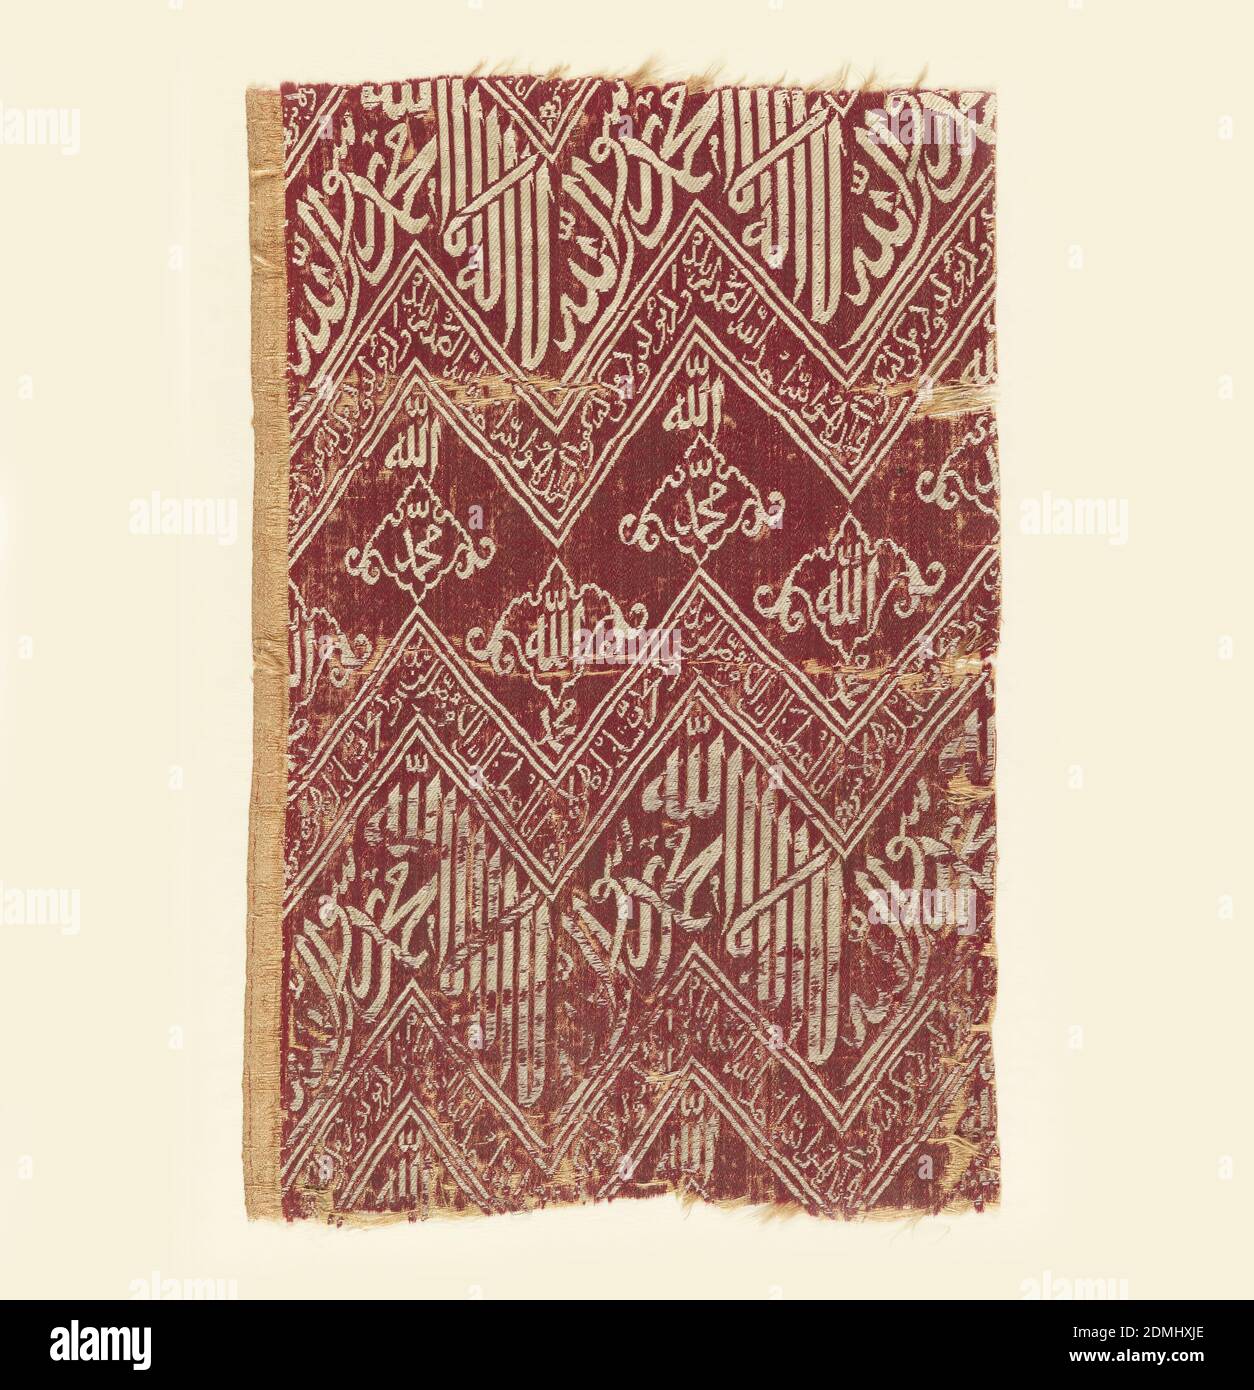 Textile, Medium: silk Technique: compound satin Label: silk compound satin, Fragment of woven silk with zigzag bands of Kufic script in white on a red ground. The inscriptions are translated as (top to bottom):, There is no god but Allah, Muhammad is the prophet of God (repeated), Say: He is God alone: God the Eternal! He begetteth not and is not begotten; and there is none like unto him, Allah (repeated) Muhammad (repeated), Truly we have given thee an abundance; Pray therefore to the Lord, and slay the victims. Verily whoso hateth thee shall be childless, Turkey, 16th–17th century, woven Stock Photo